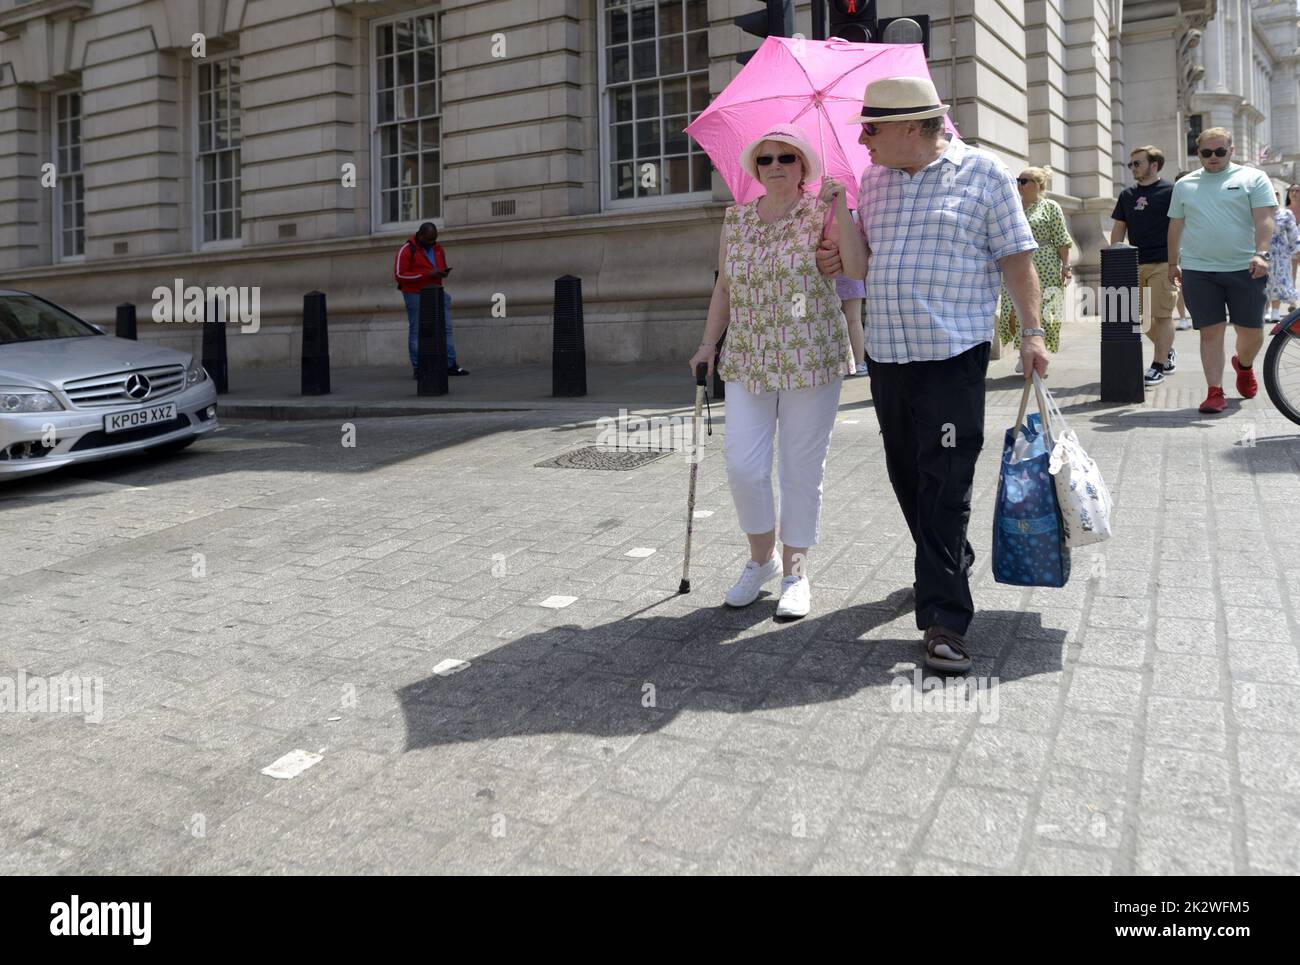 London, England, UK. Couple with an umbrella on a hot sunny day Stock Photo